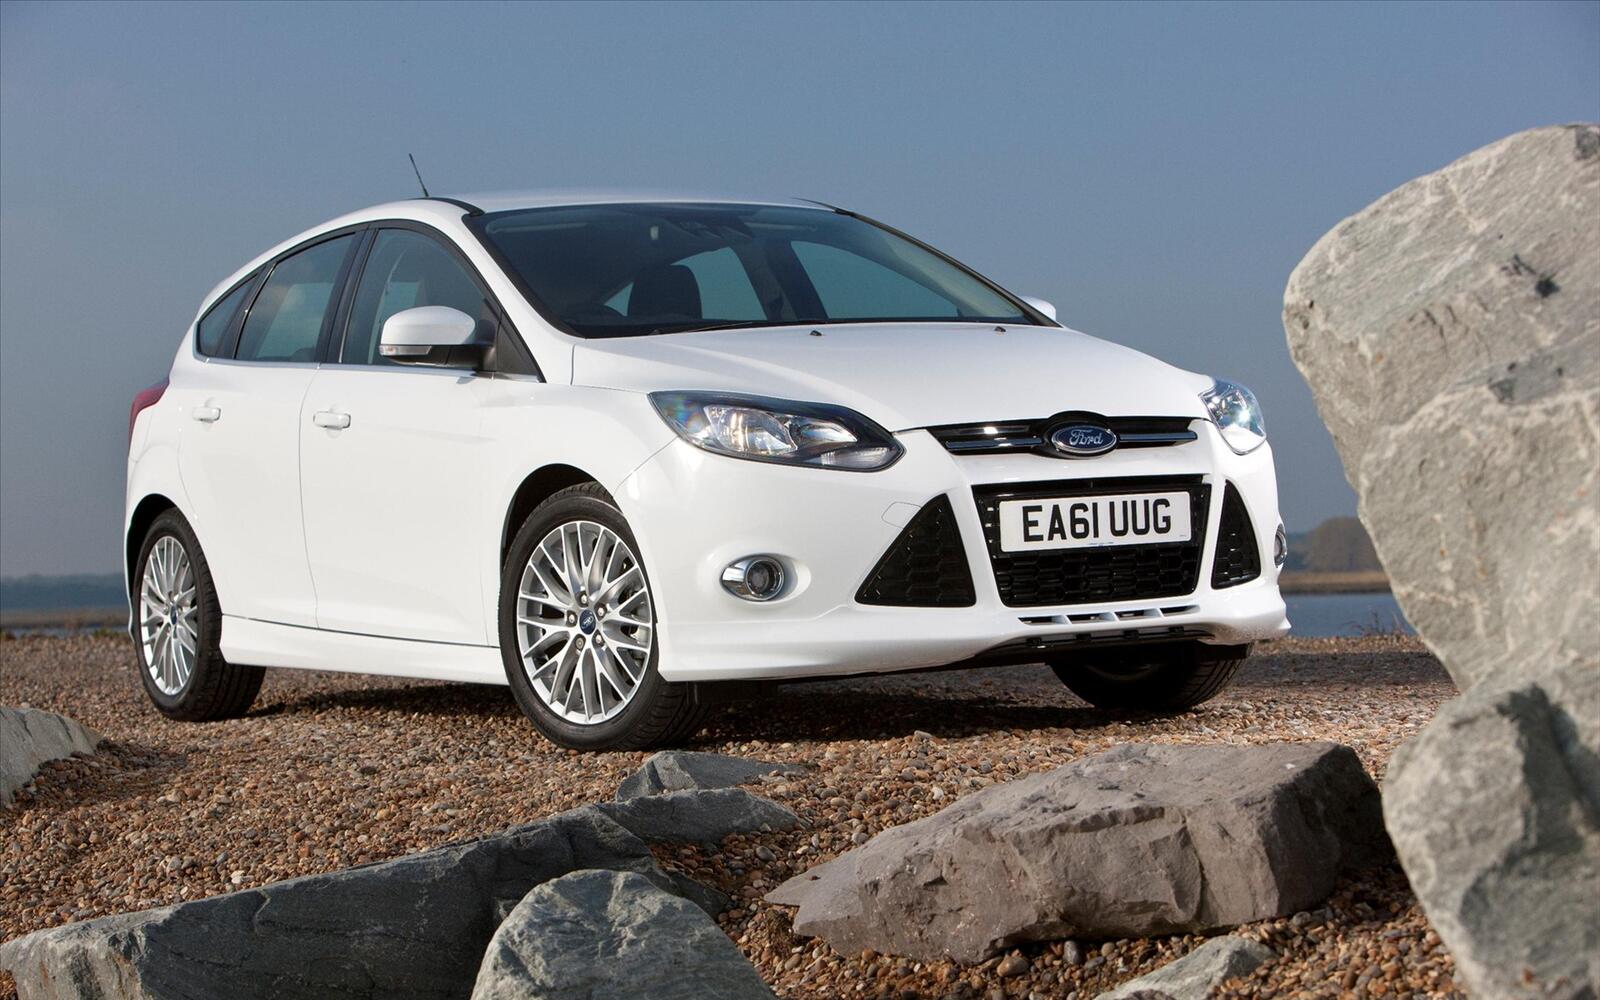 Wallpapers ford focus white on the desktop